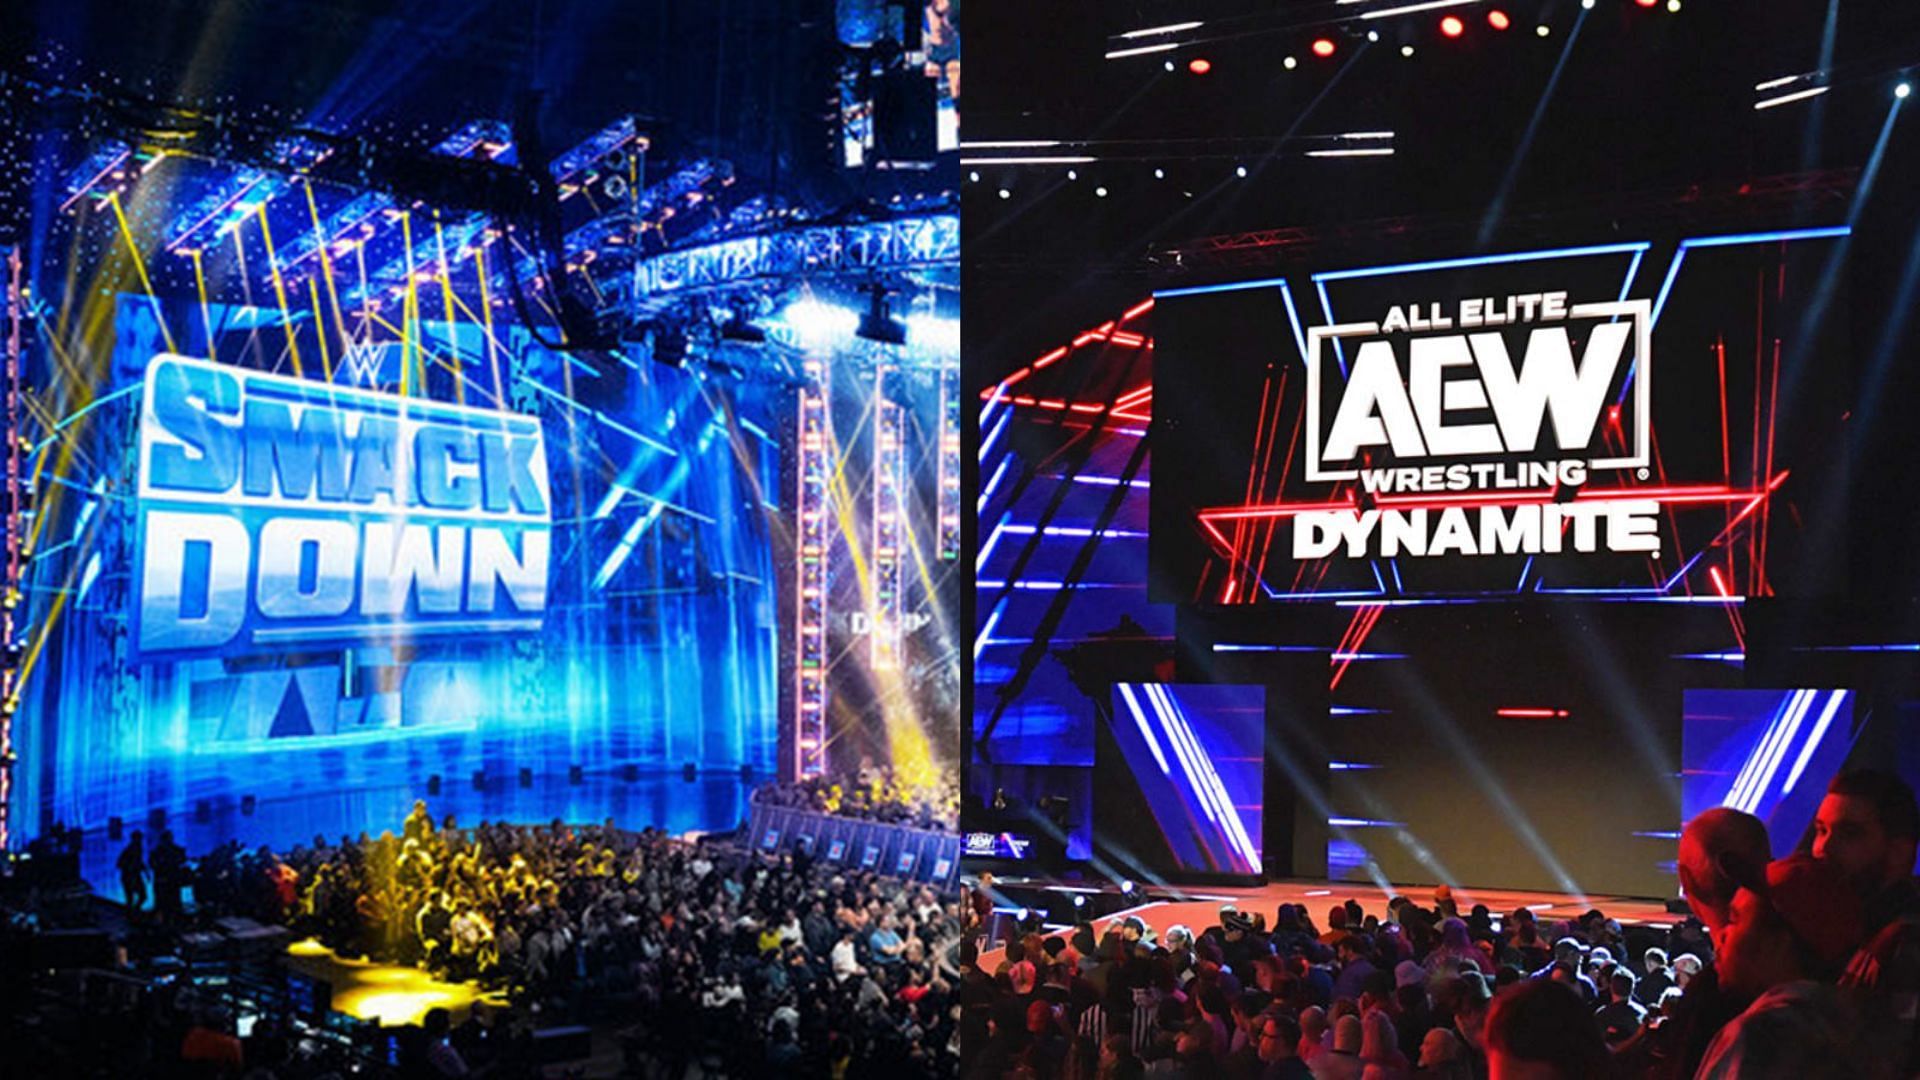 Will AEW end up losing the war against WWE?